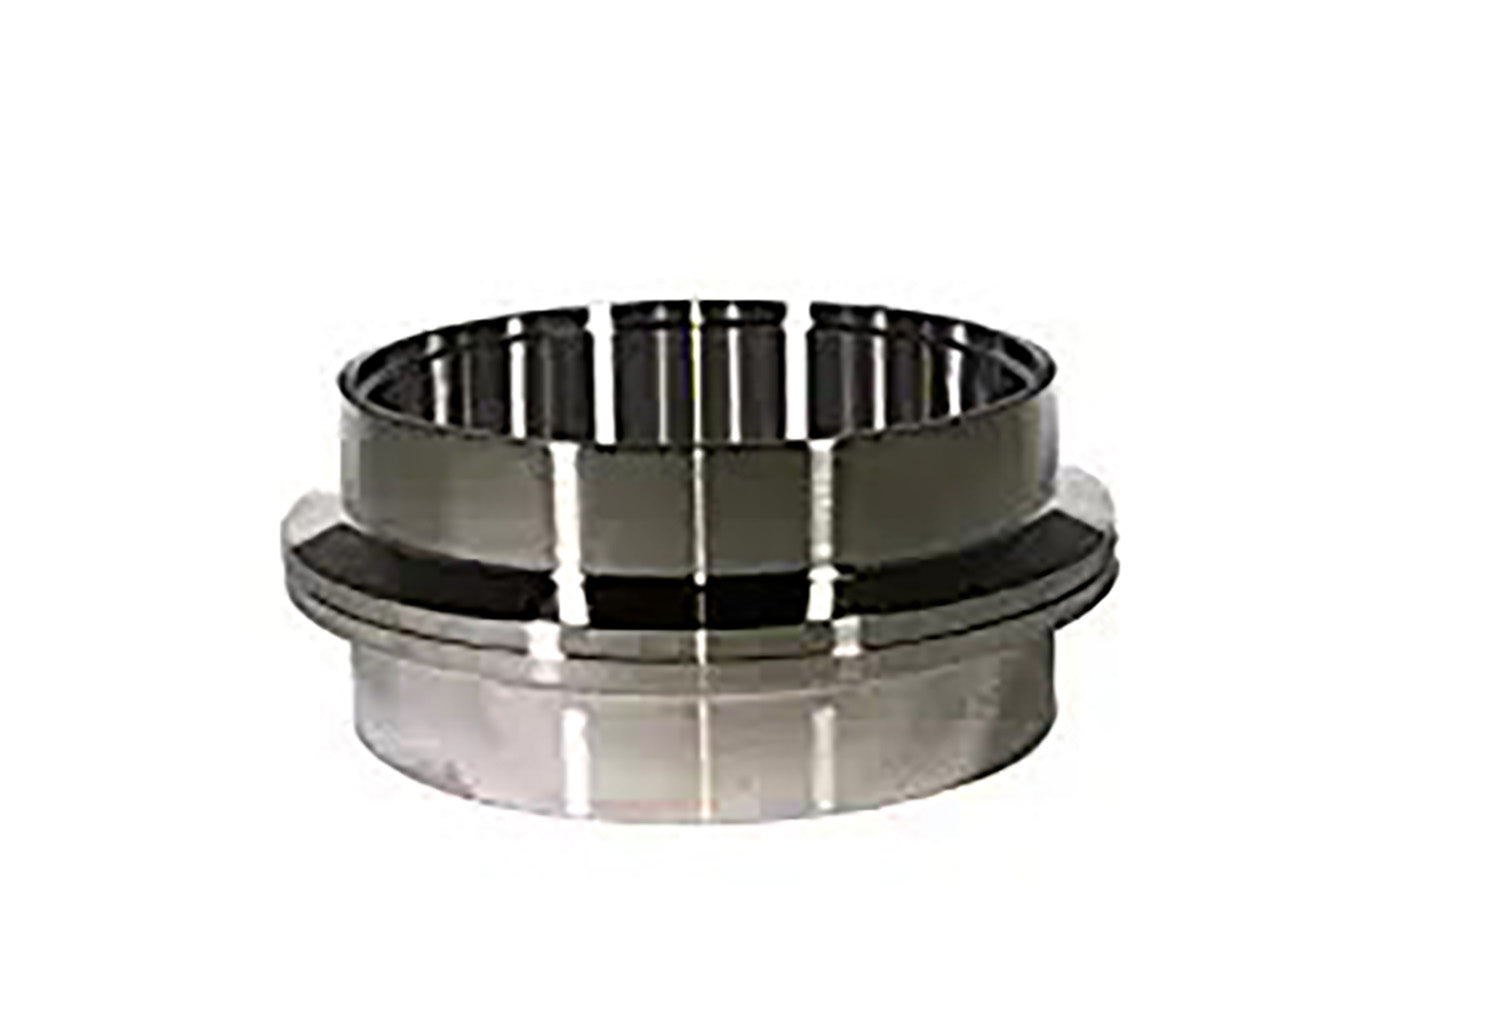 2-1/4" V Band Flange, T304 Stainless Steel, Pair (LH + RH)